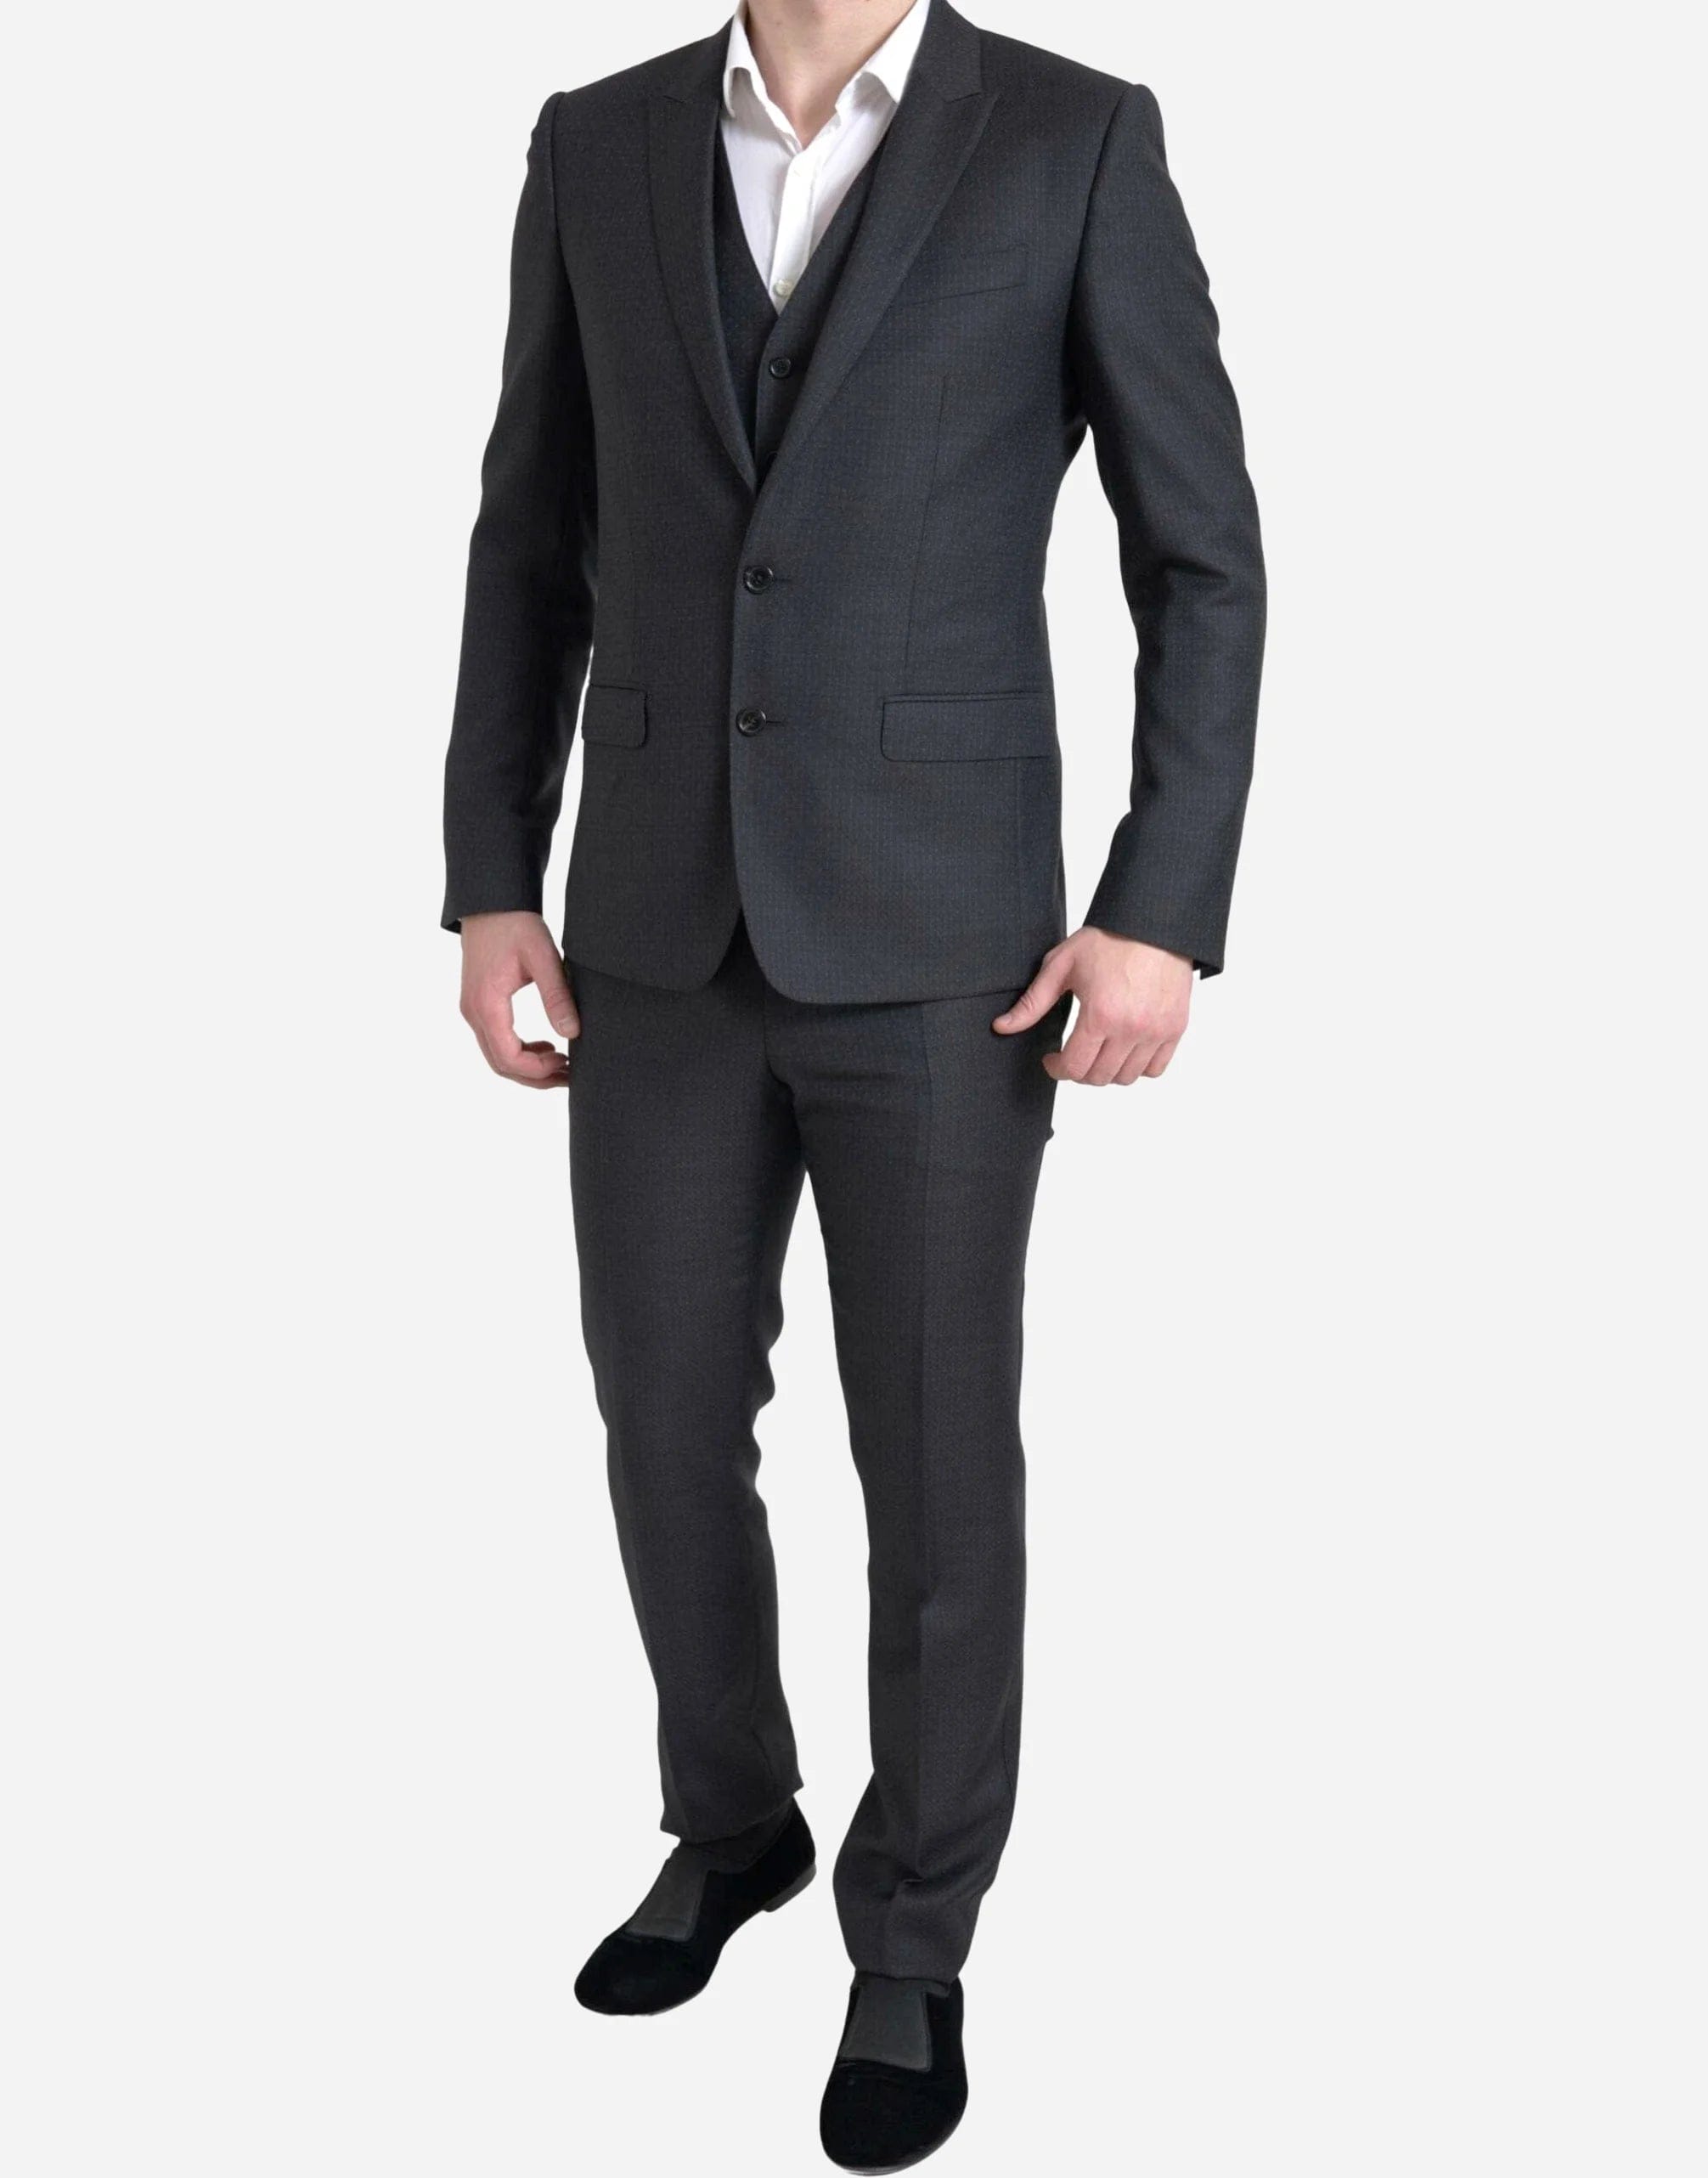 Three Piece Single Breasted Martini Suit